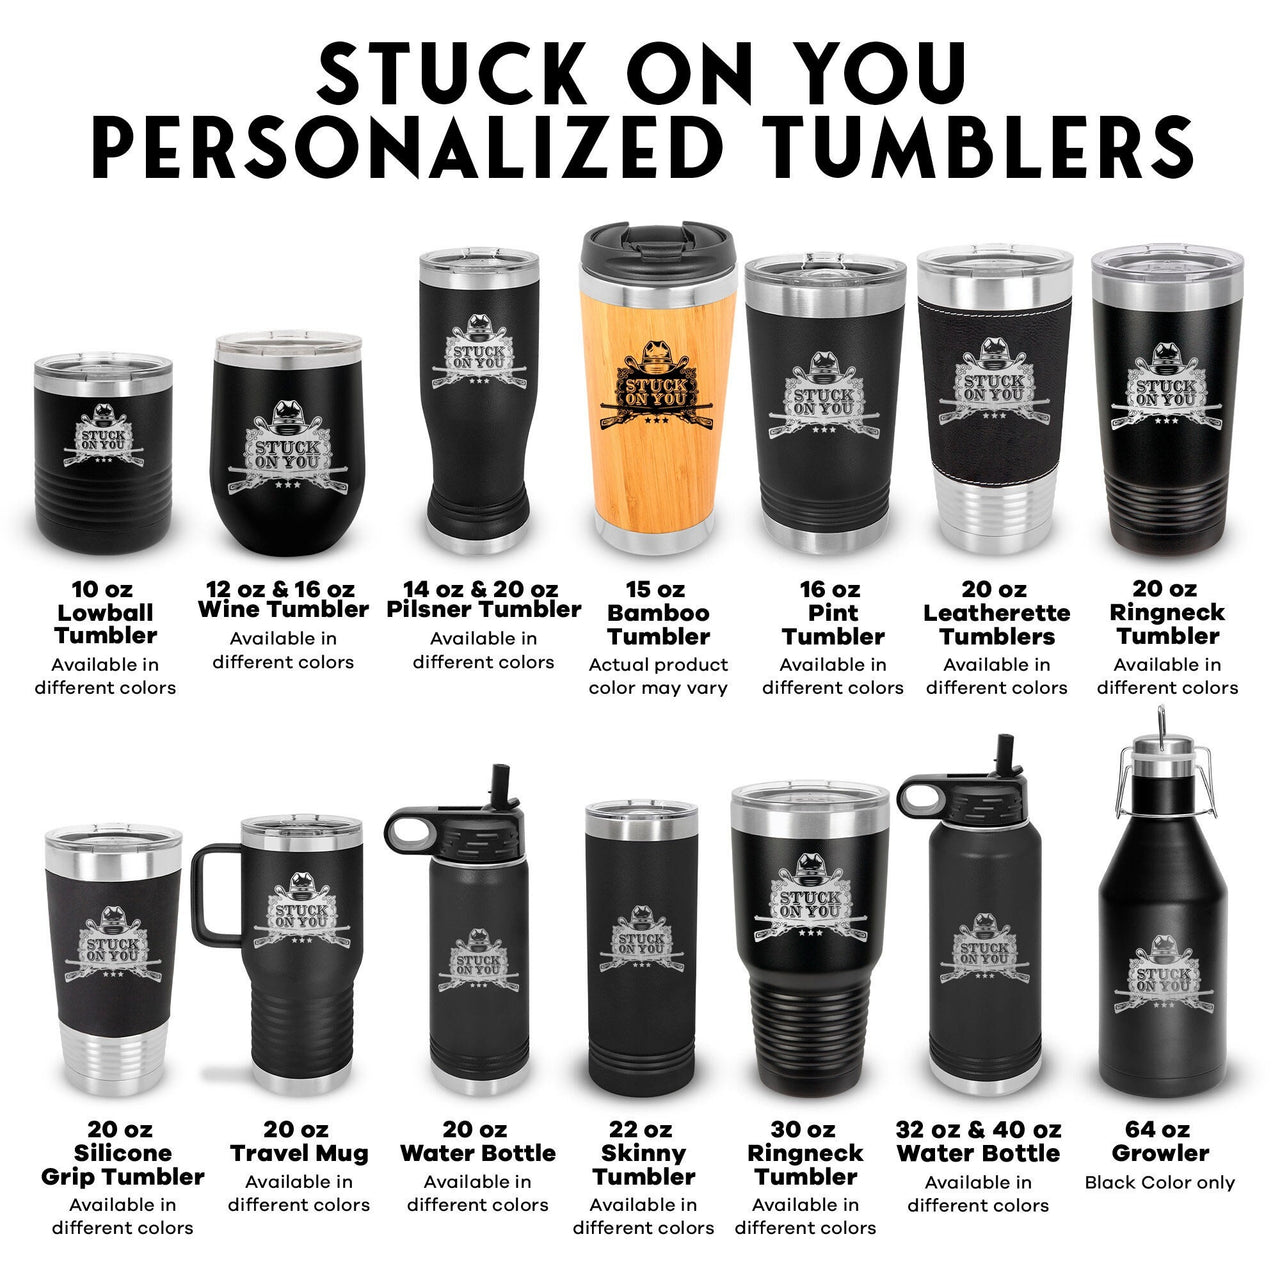 Stuck on You Valentine's Day Tumblers, Hunting Hat and Guns Design Tumbler Gift for Him, Hunter, Tumblers, Mugs, Water Bottle, Growler